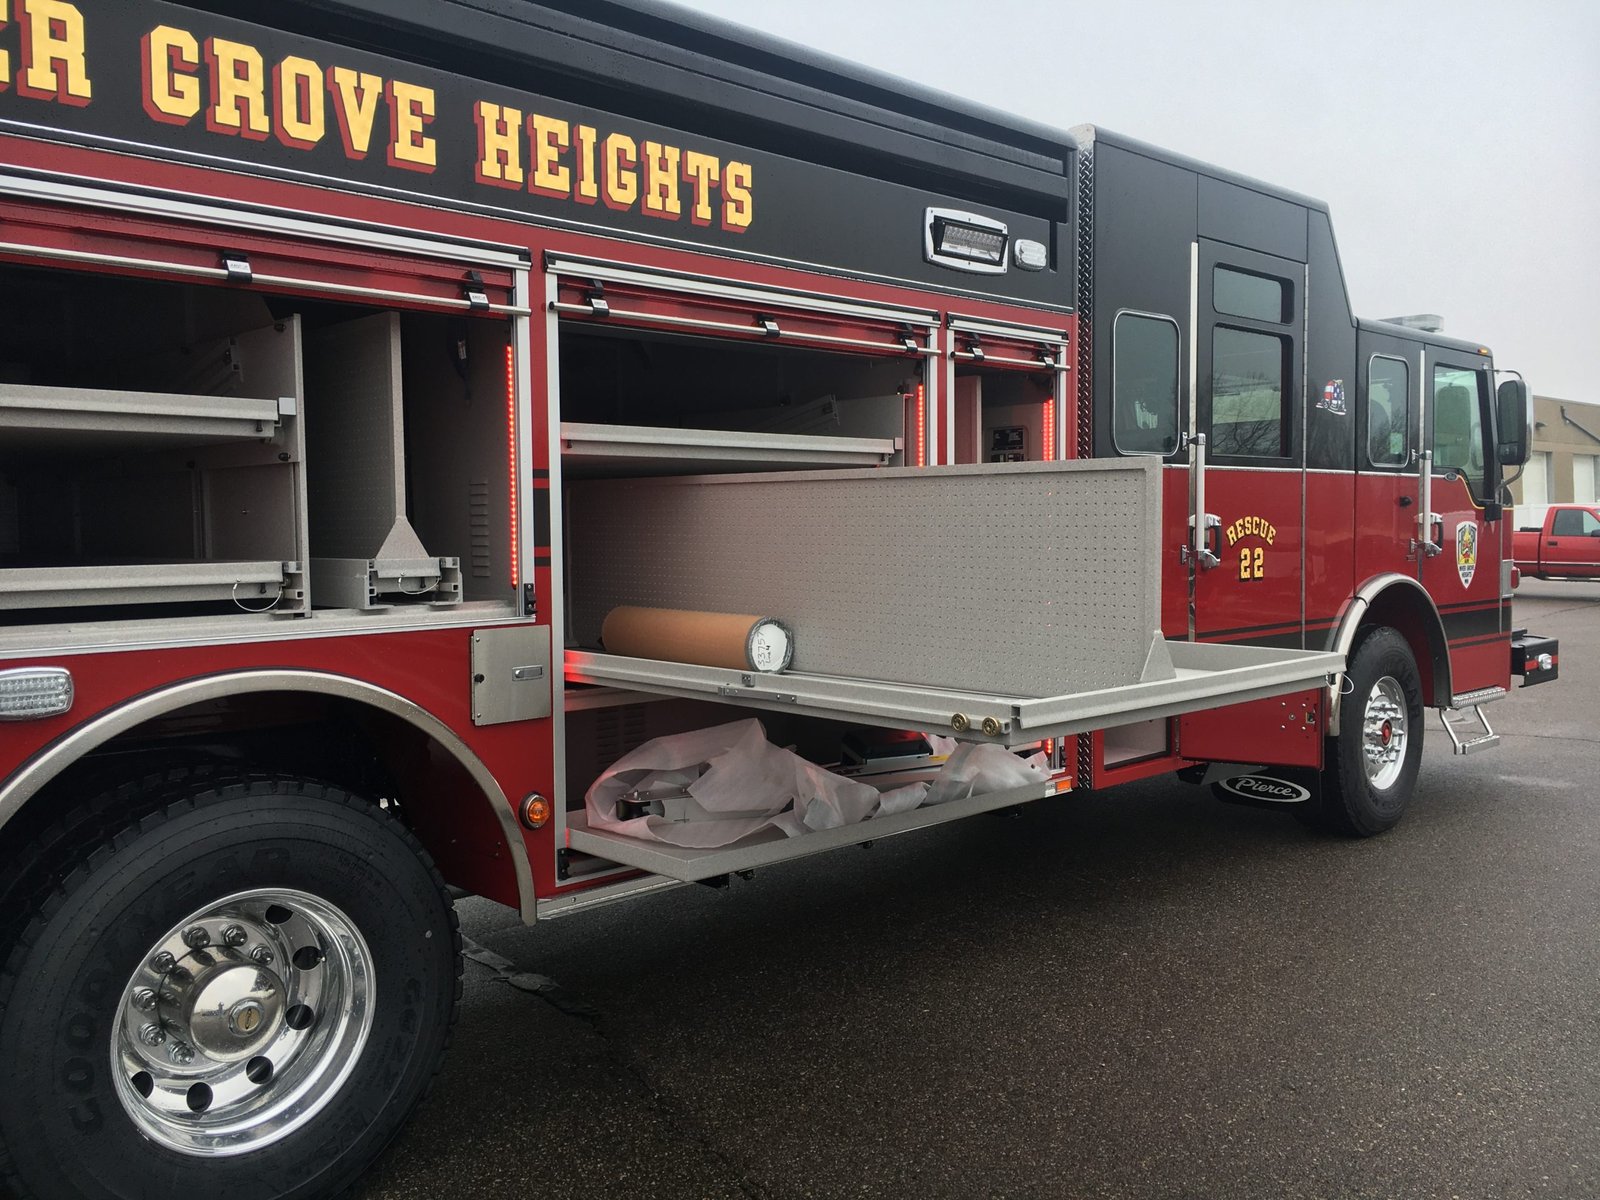 City of Inver Grove Heights - Rescue